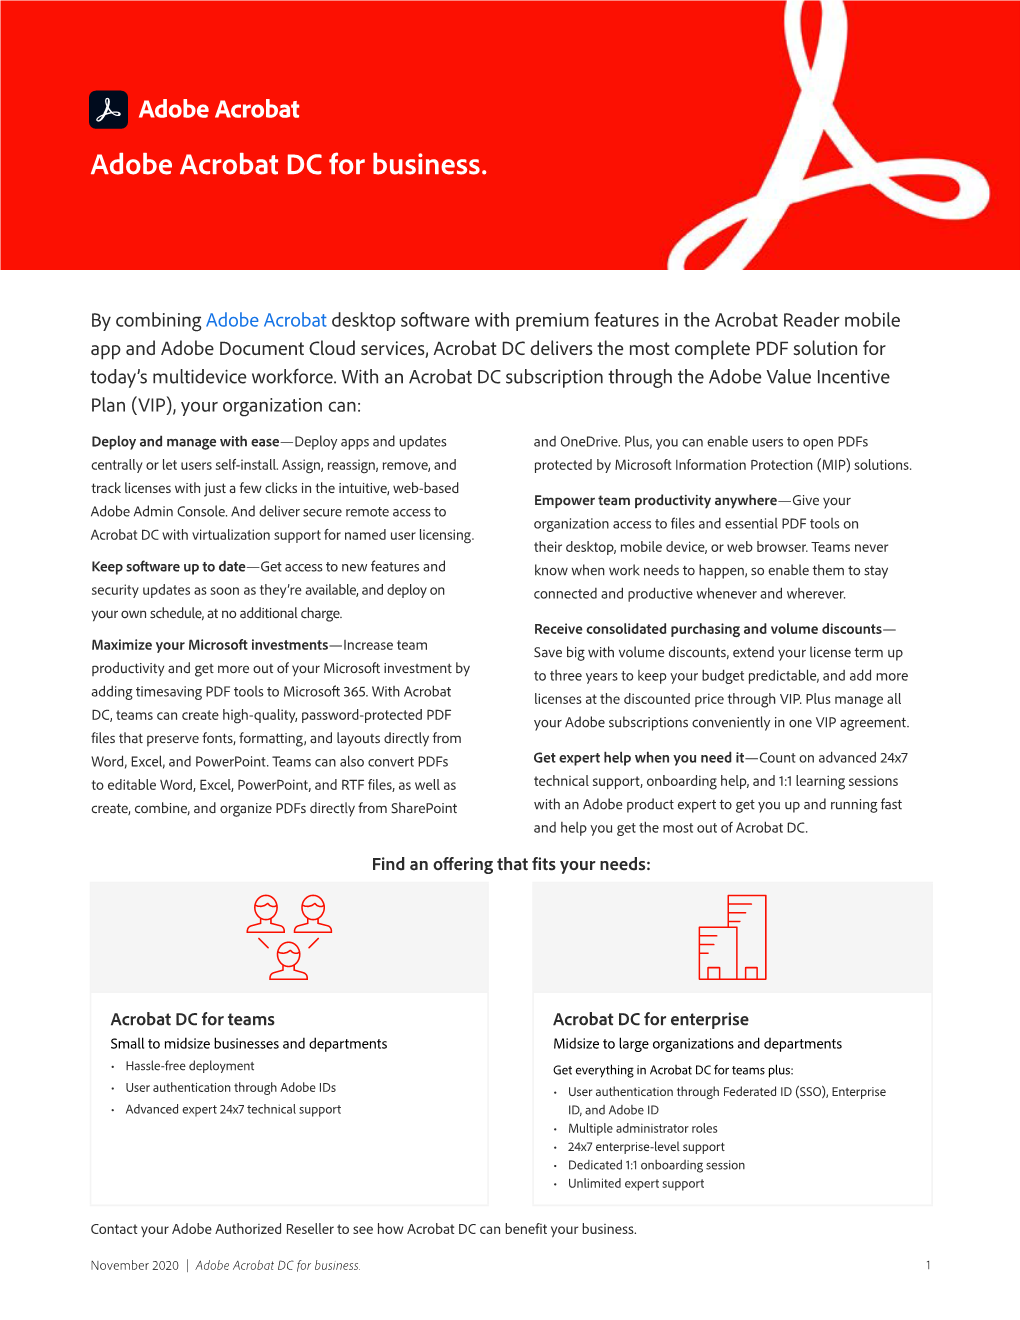 Adobe Acrobat DC for Business